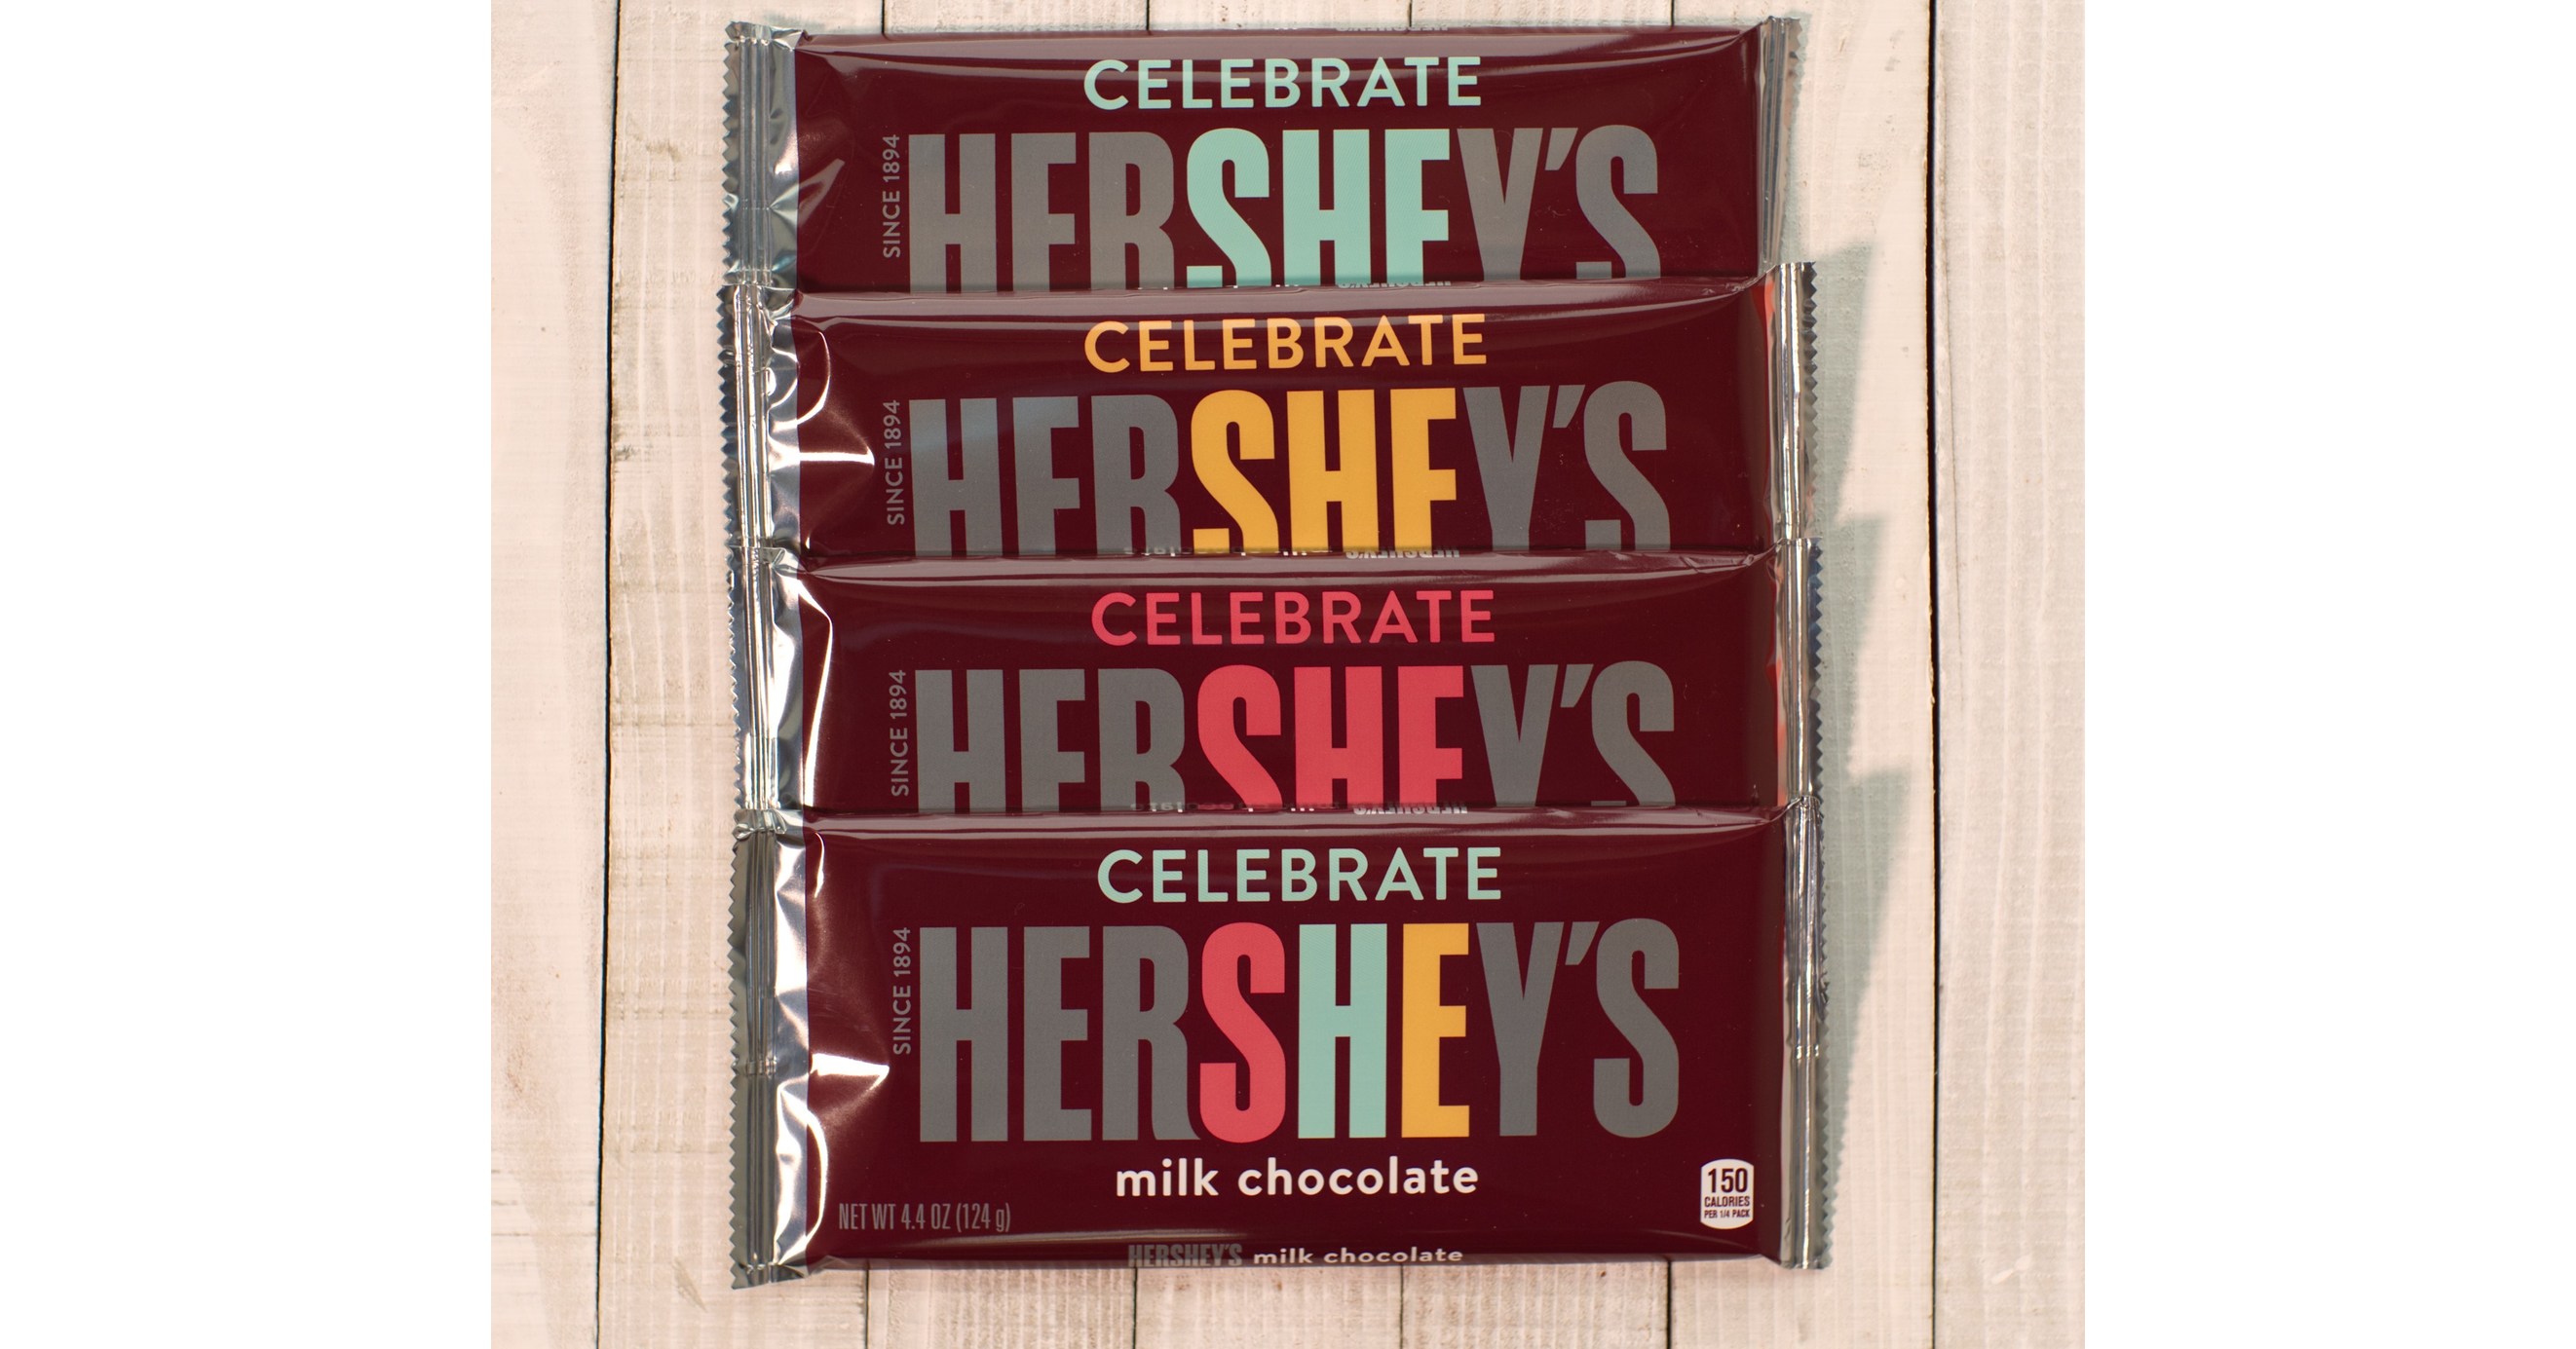 Going for the Gold: Here's The First New Hershey Bar in 22 Years